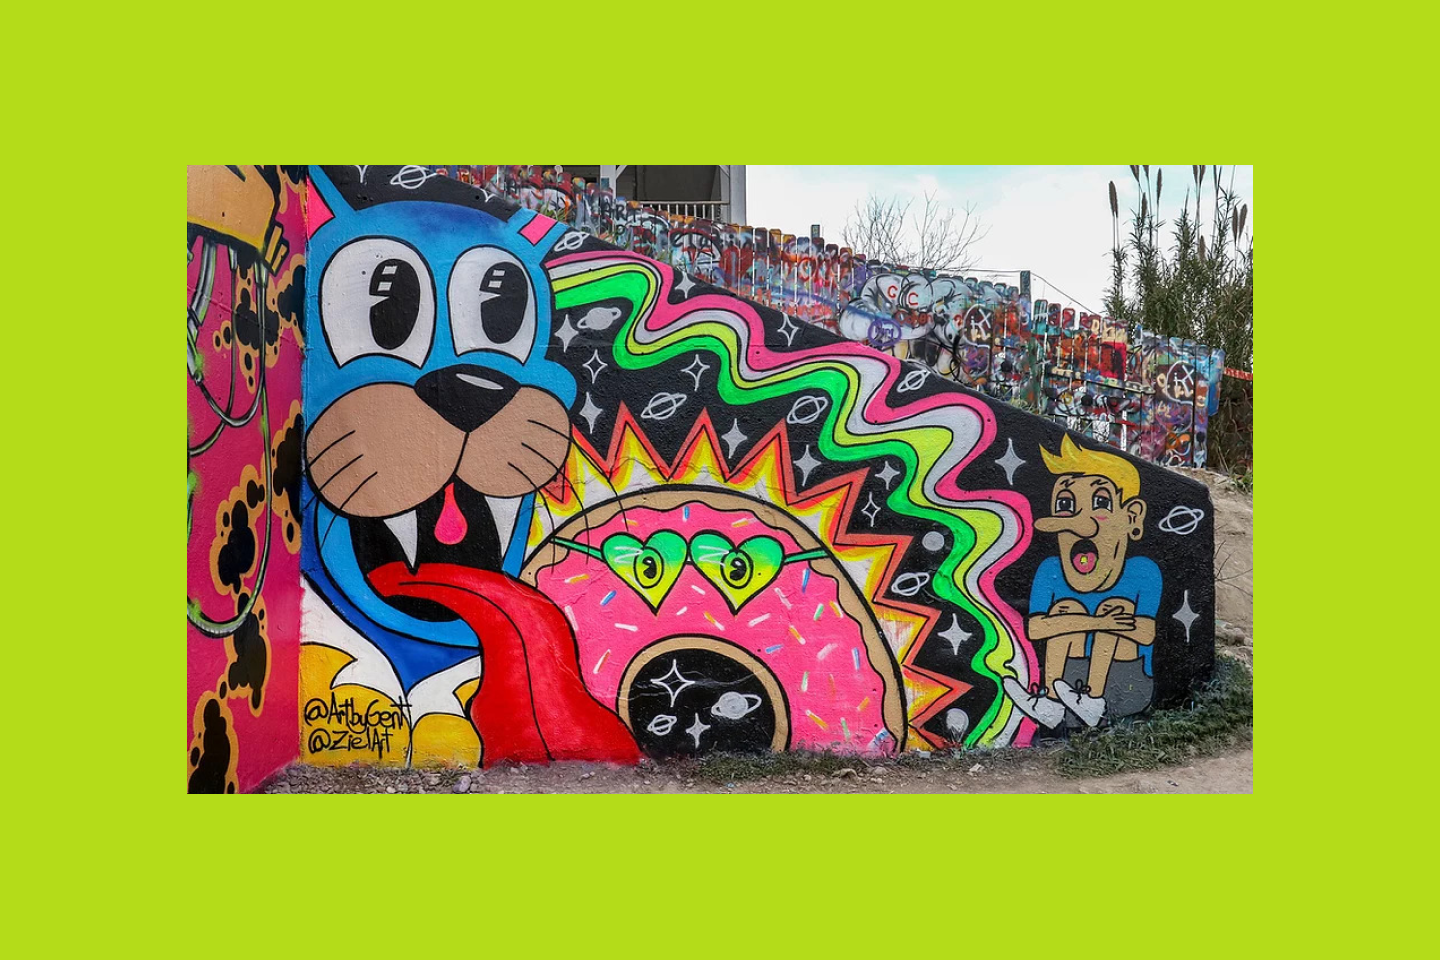 graffitti art wall with neon cat, donut, and person